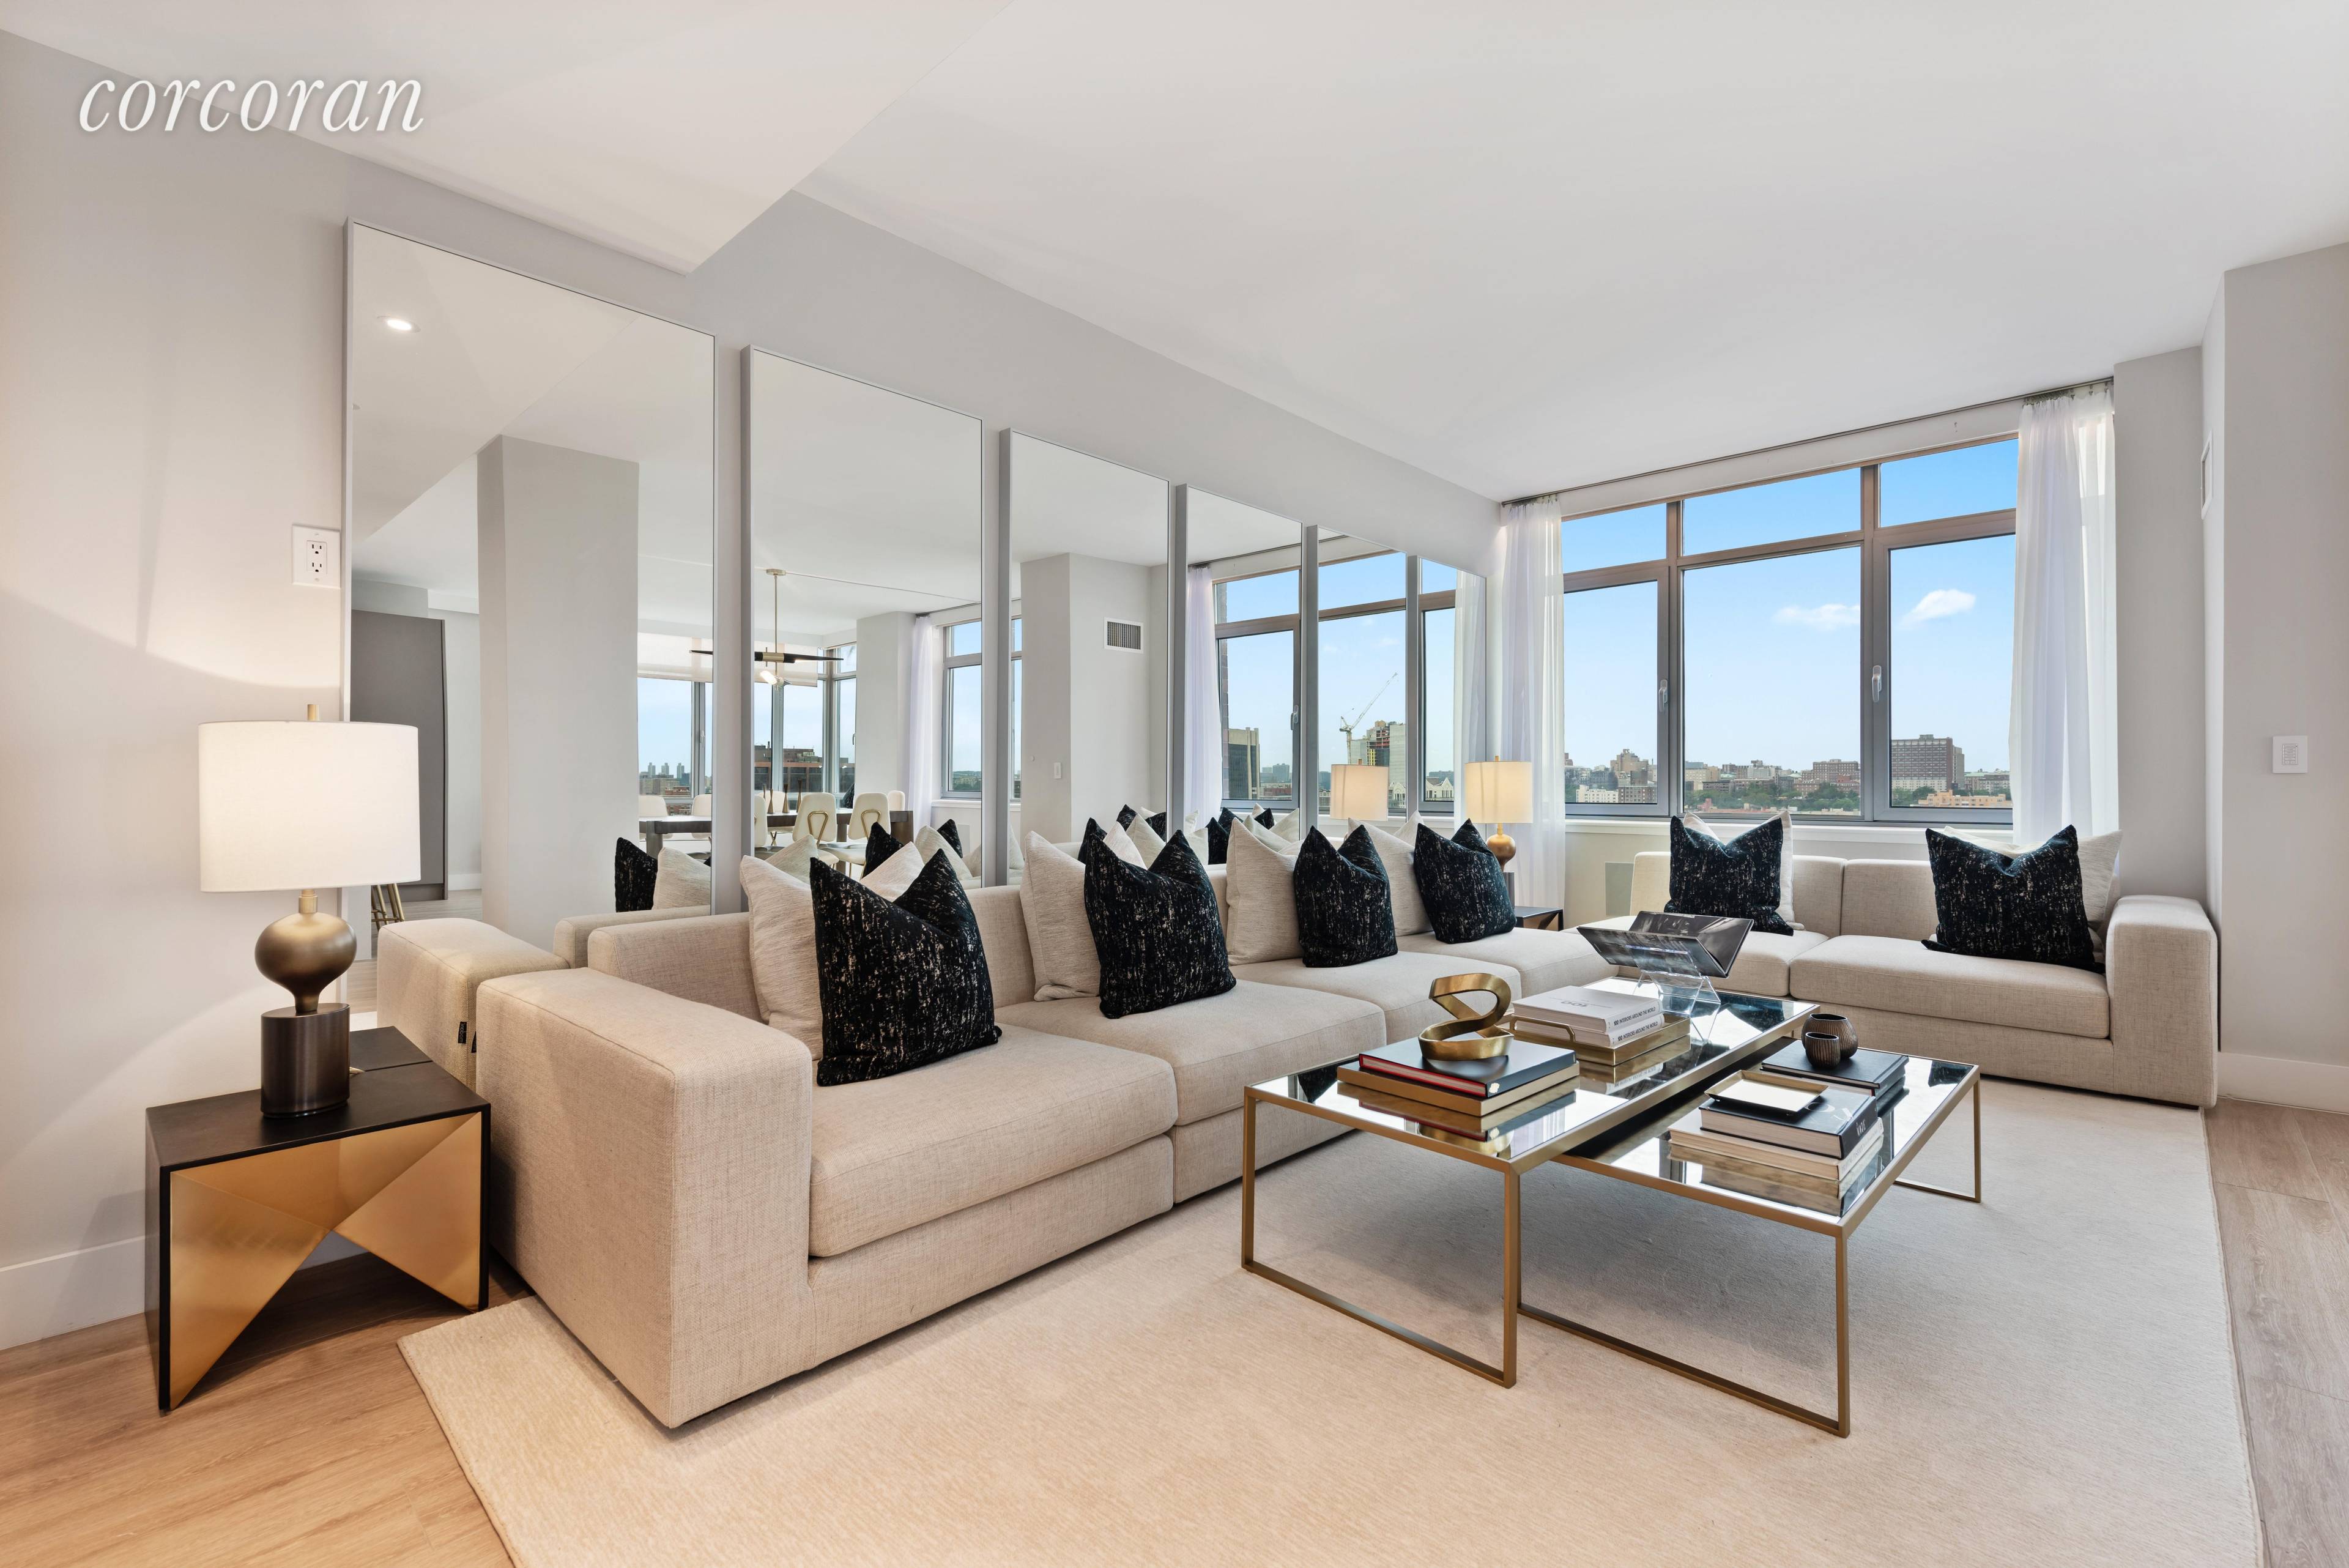 Welcome to this truly unique 5 bedroom luxury residence on Fifth Ave with beautiful Park Views in the most magnificent condominium in East Harlem.